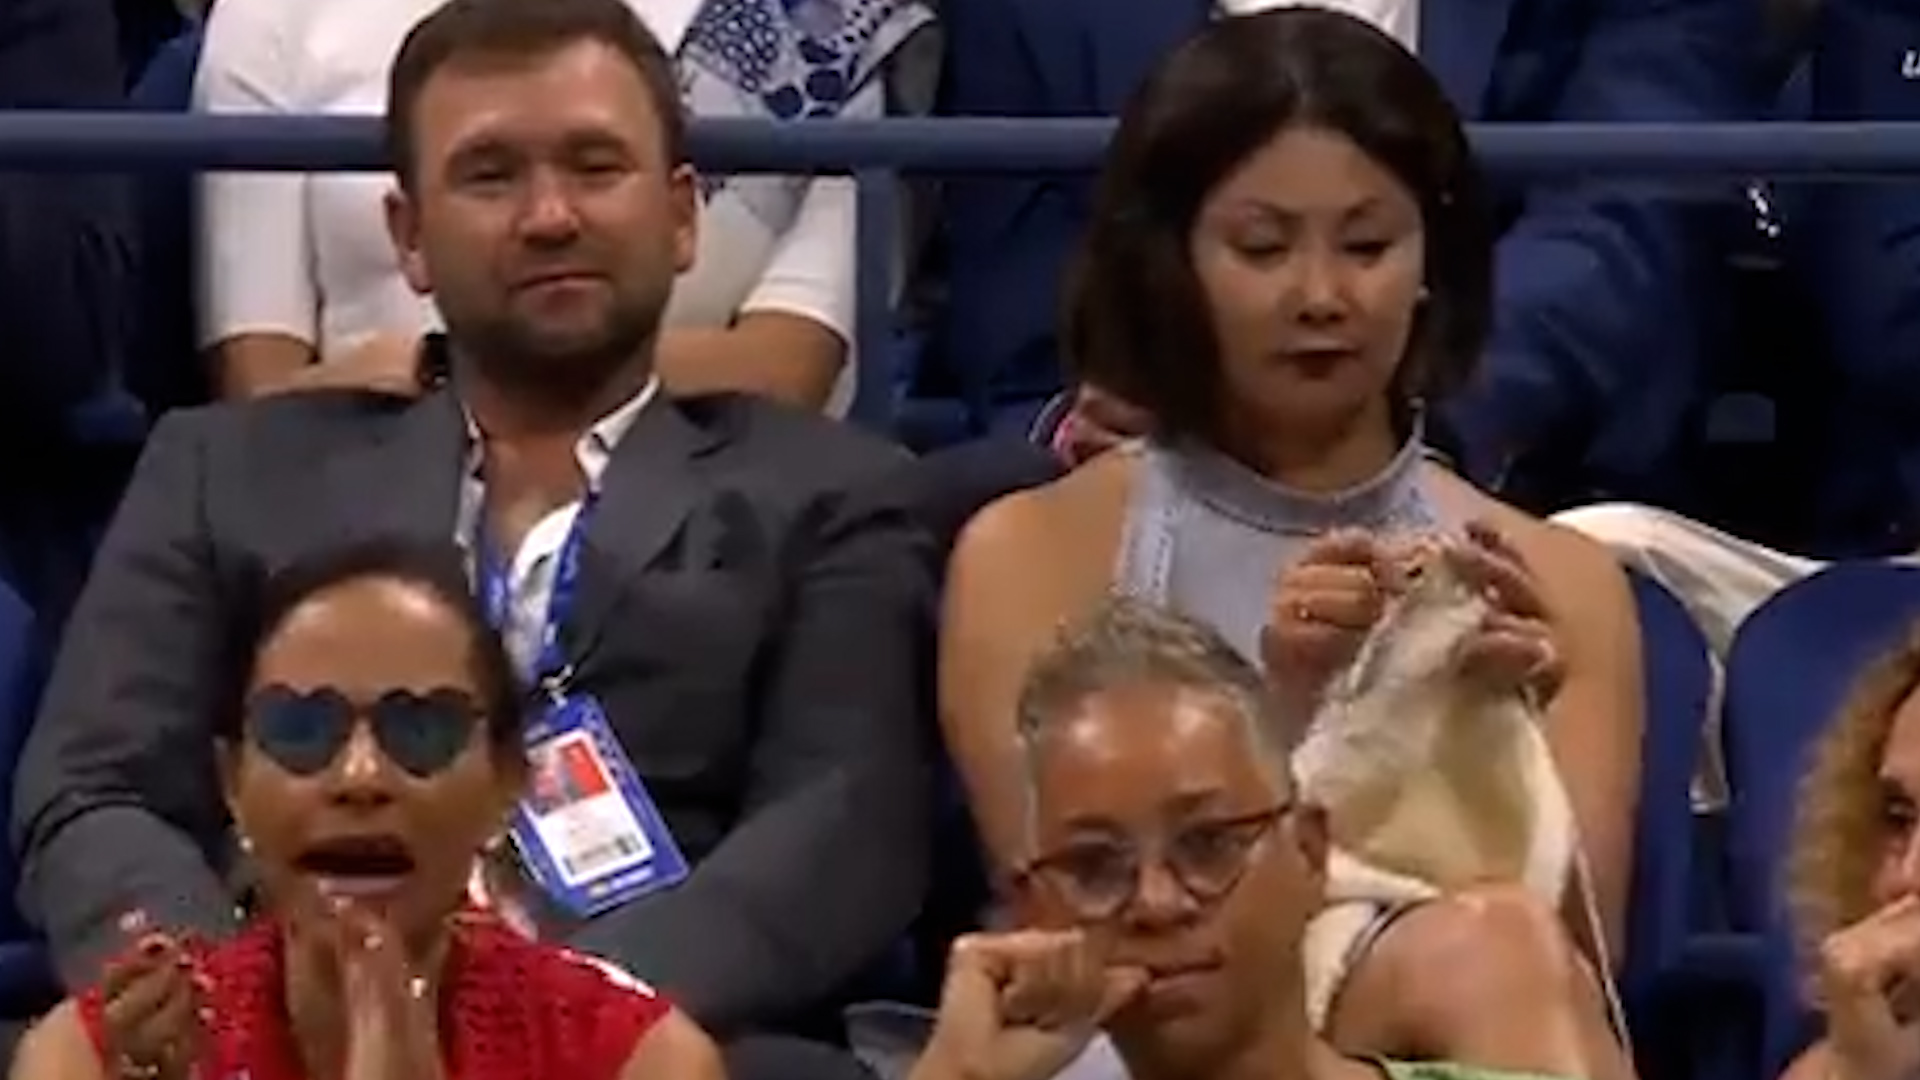 Bizarre moment at US Open: Woman caught knitting during semifinal